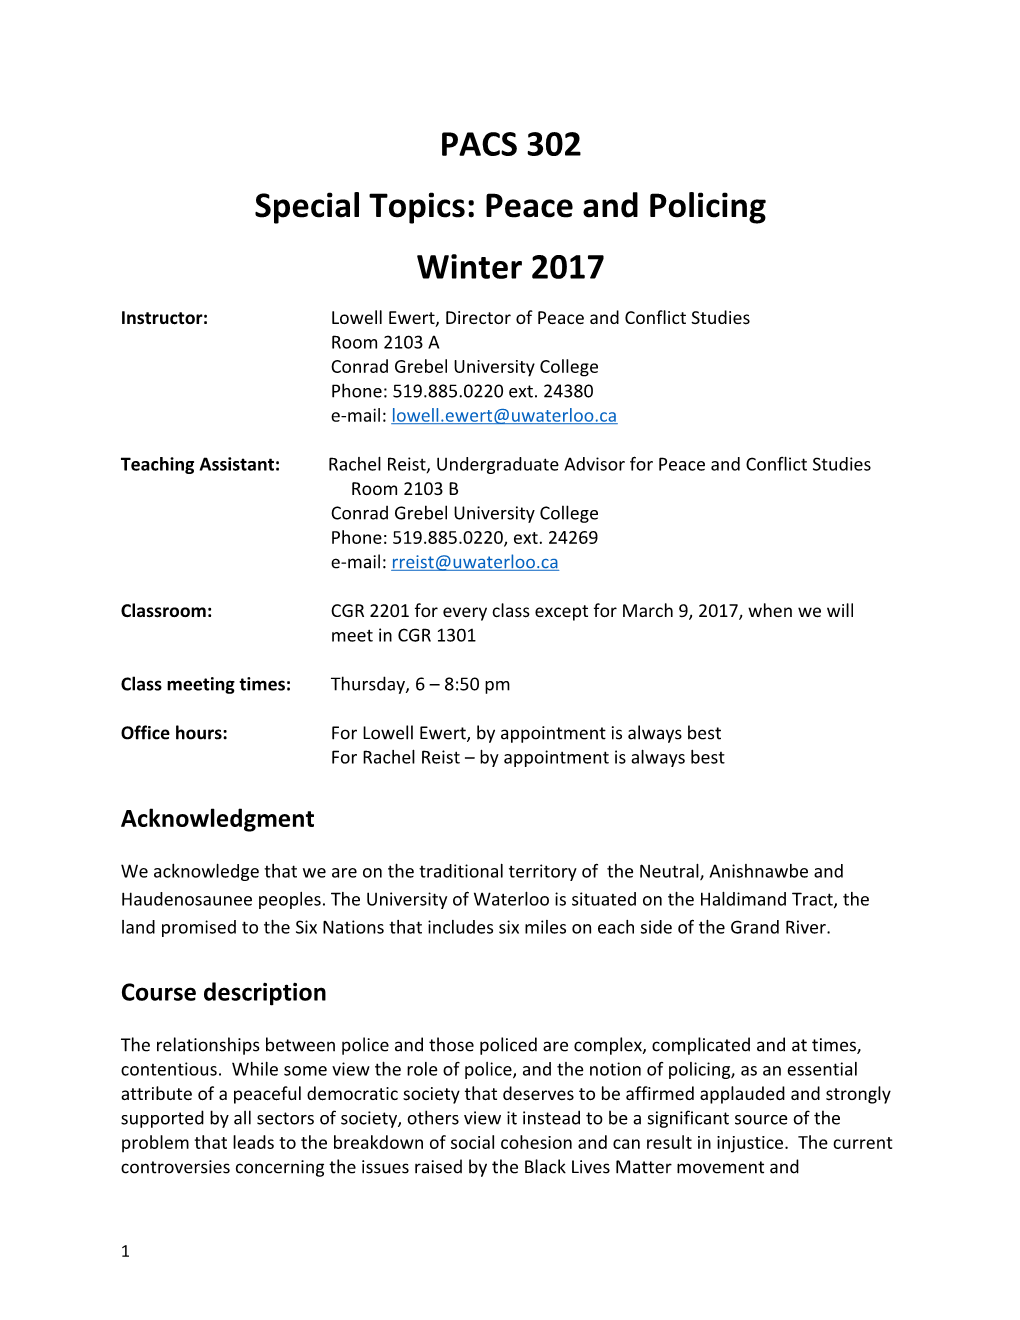 Special Topics: Peace and Policing